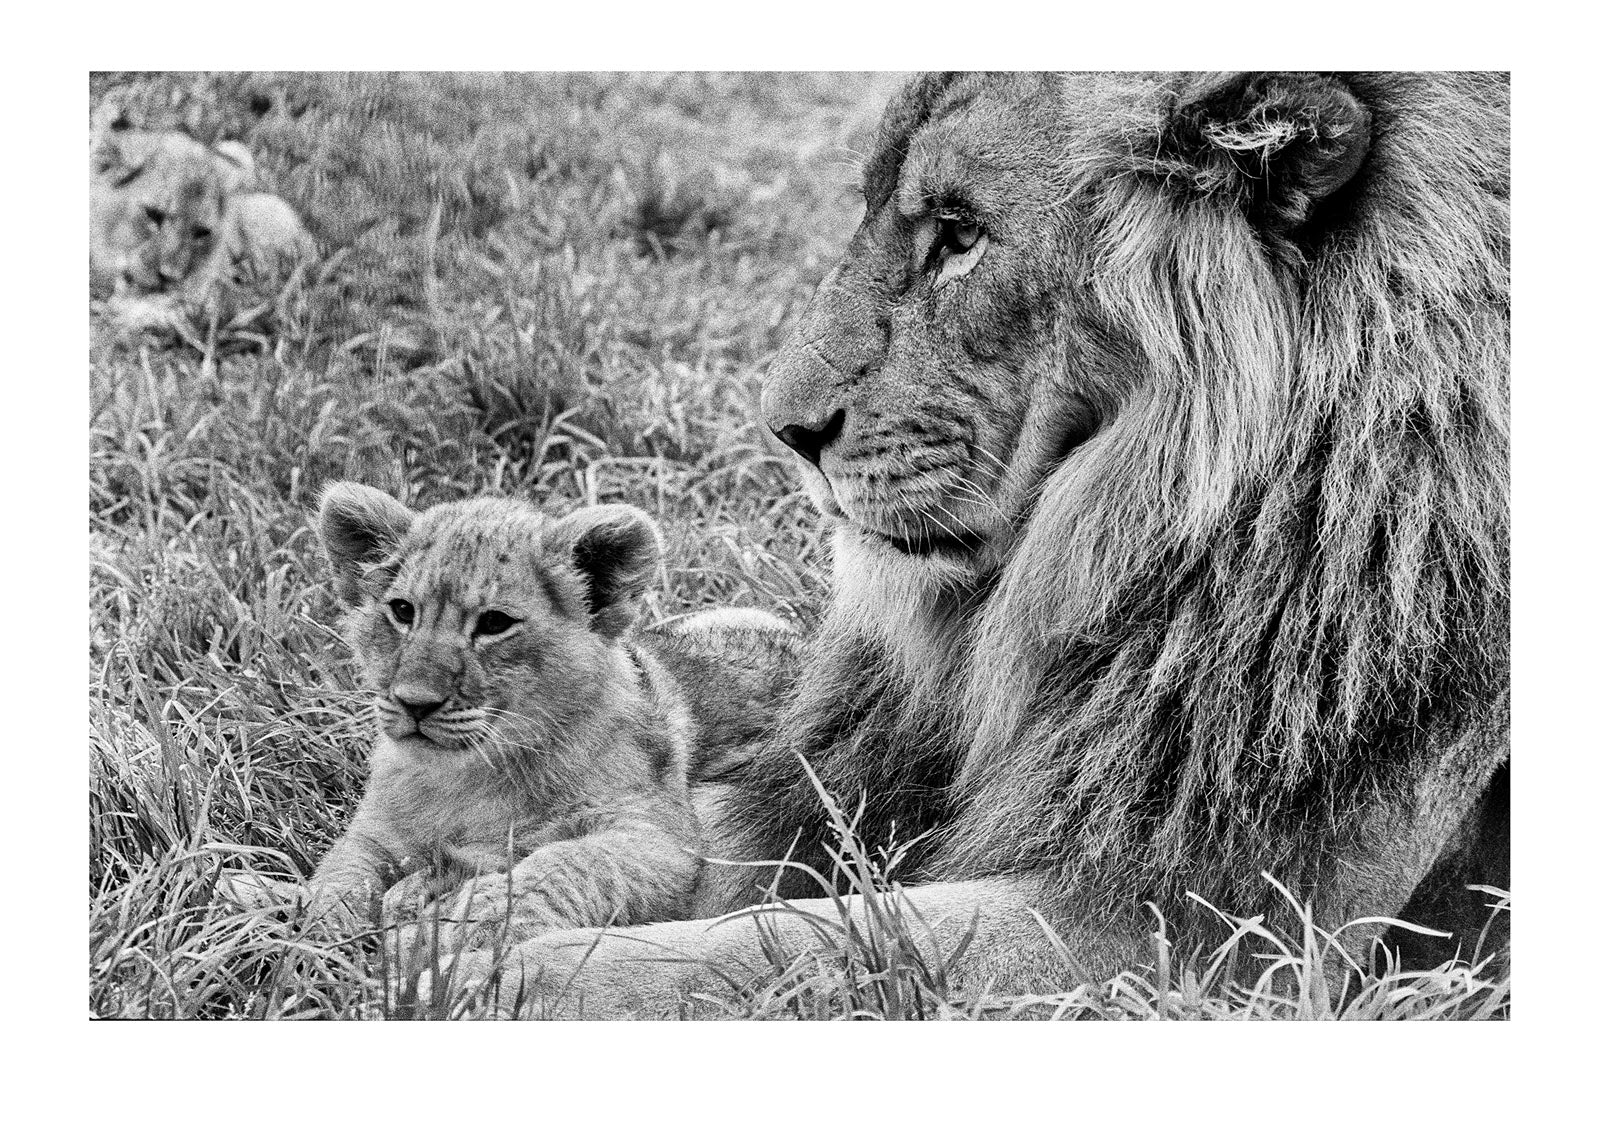 A lion cub rests across his fathers massive paw, a Simba and Mufasa moment. Captured on Ilford HP5 black and white negative film. Zoological Board of Victoria, Victoria, Australia.